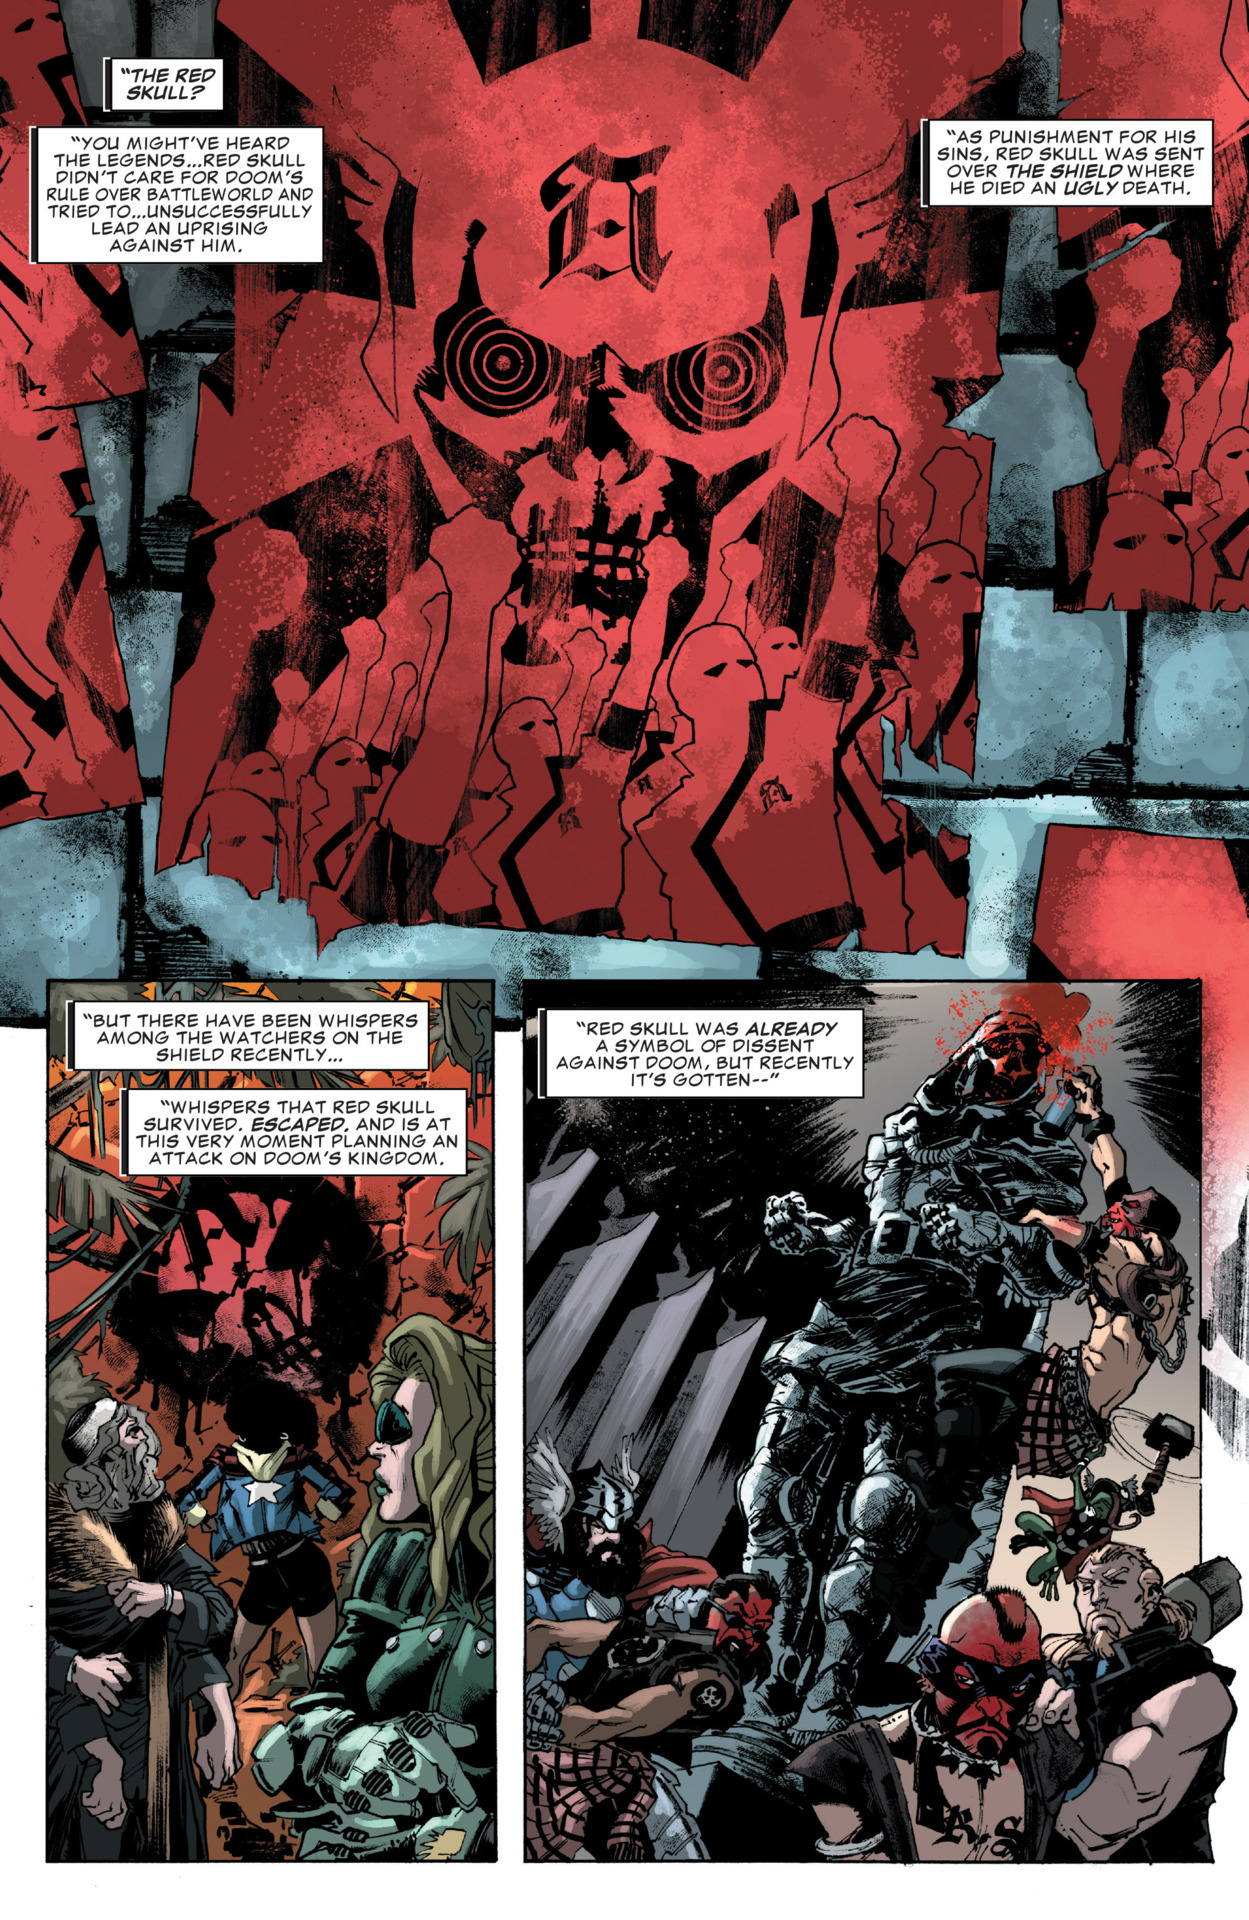 Red Skull means something very different to the denizens of Battleworld.